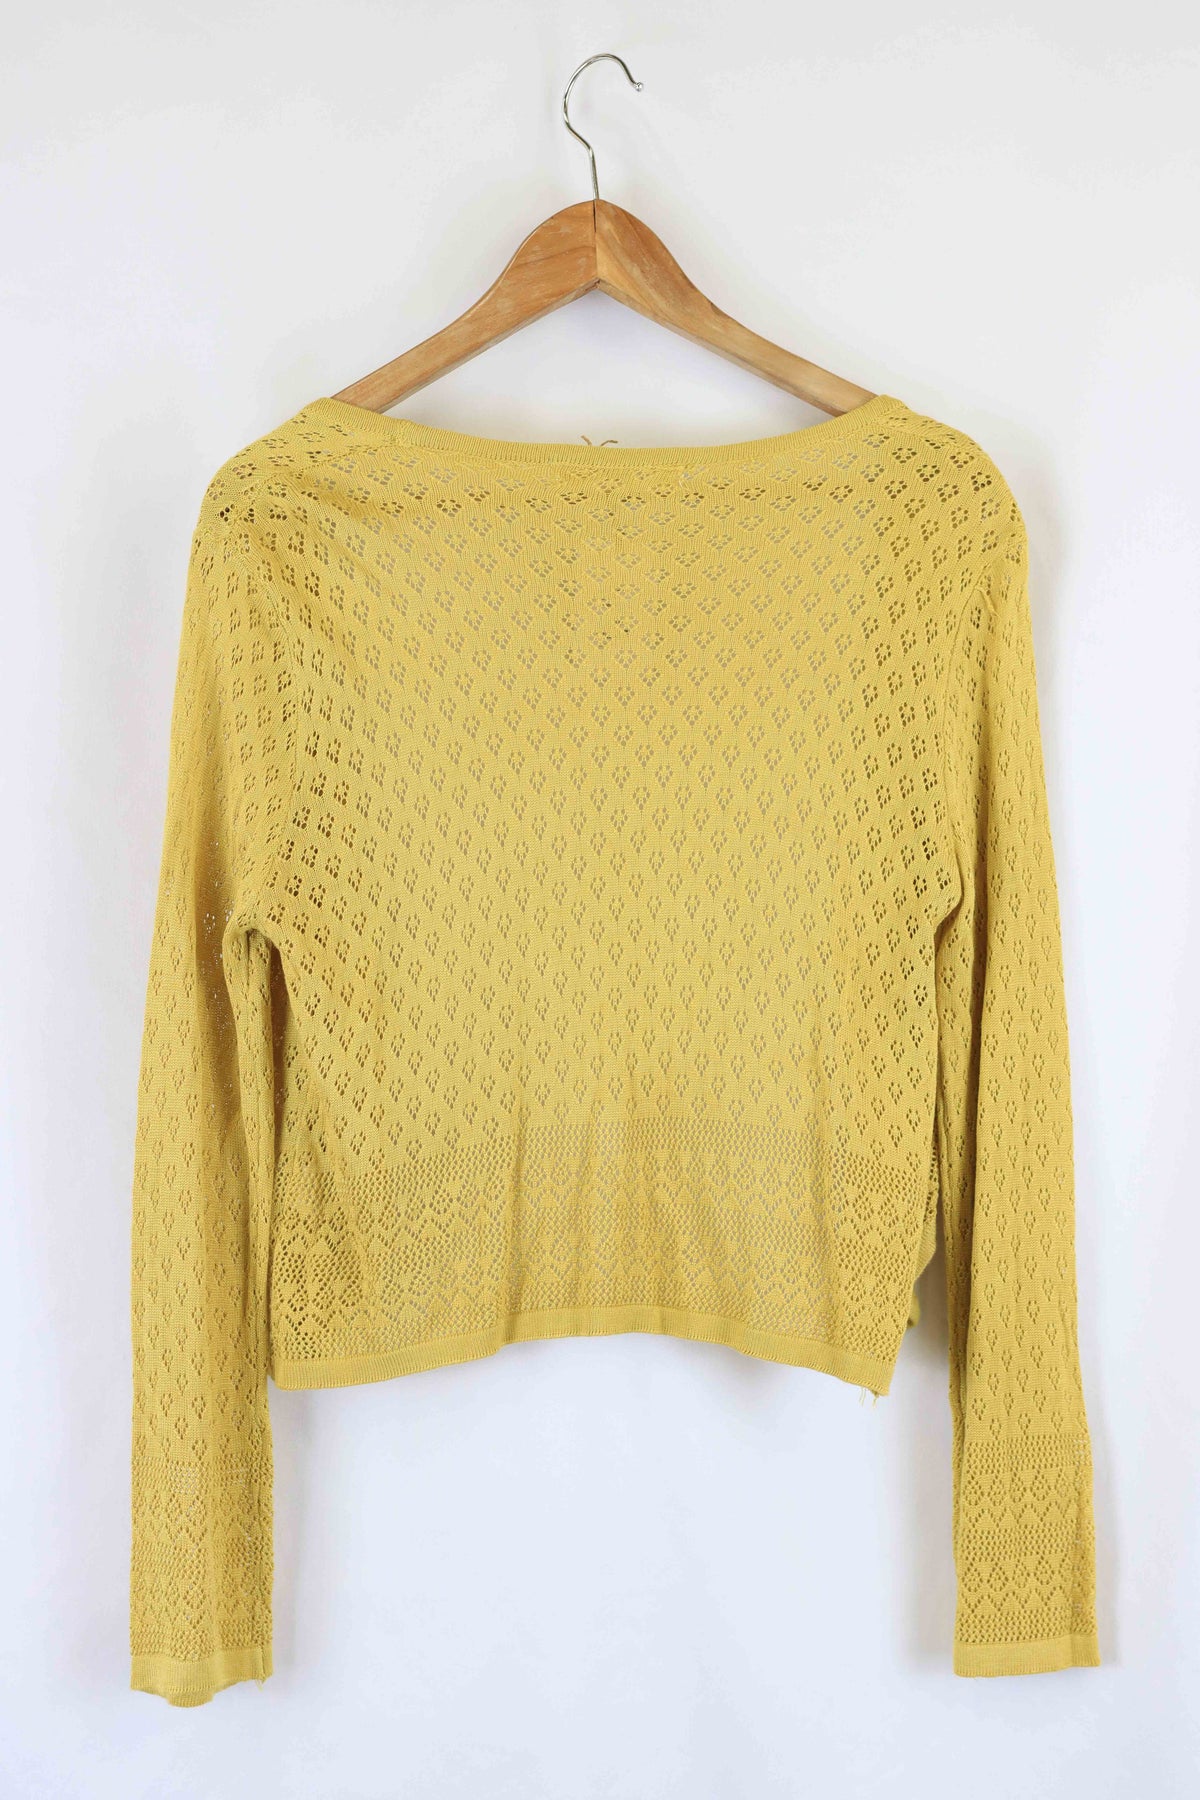 Simply Love Yellow Knit Cardigan S